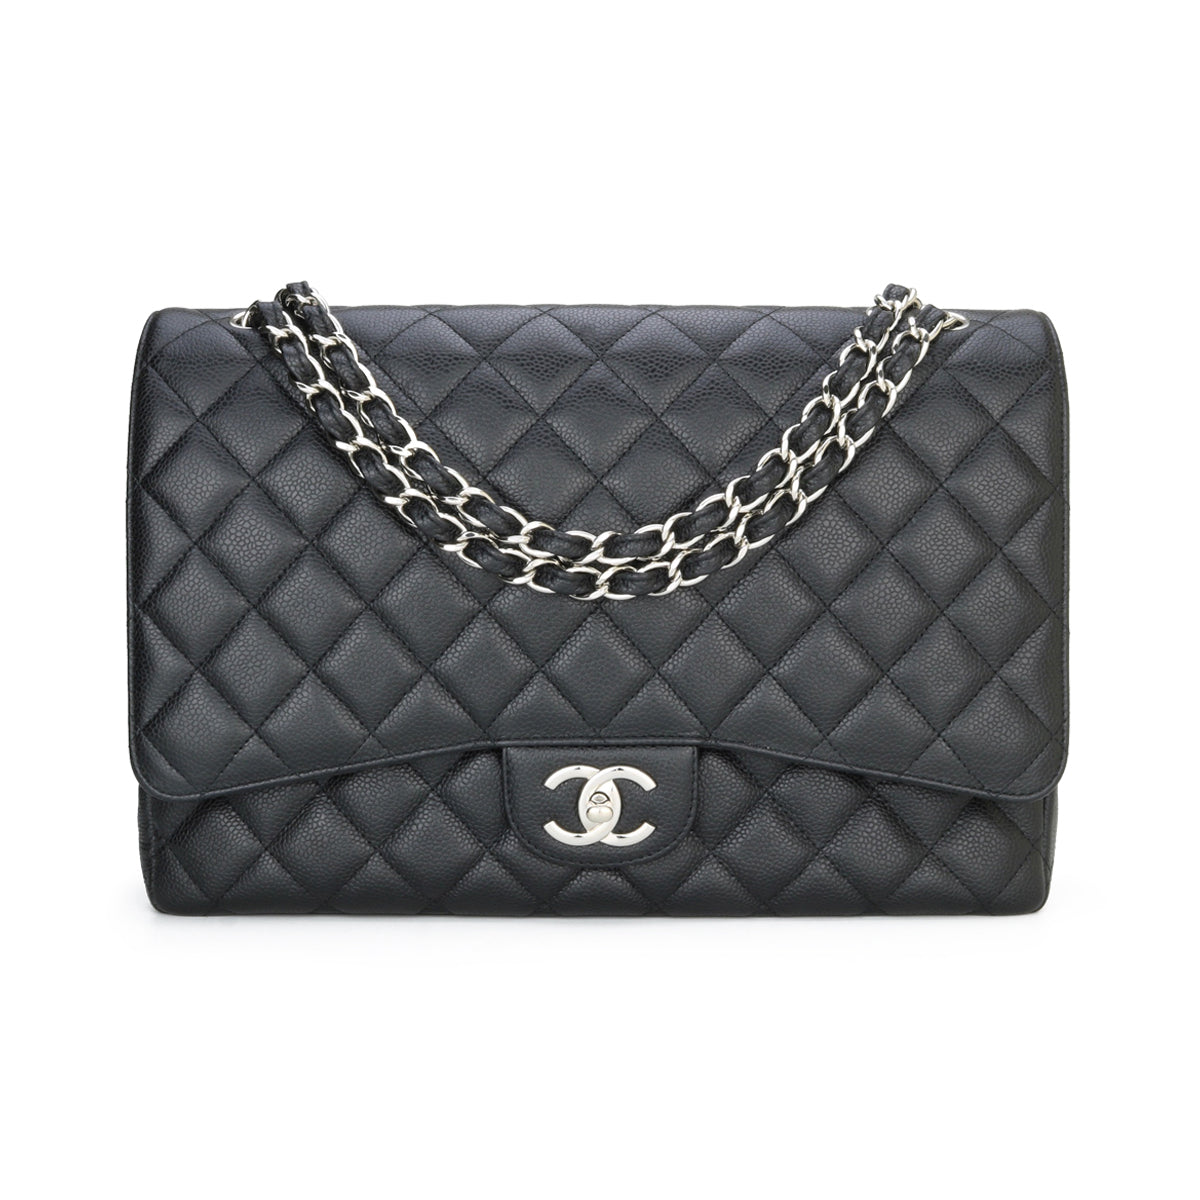 The ultimate guide to buying vintage and preloved Chanel bags